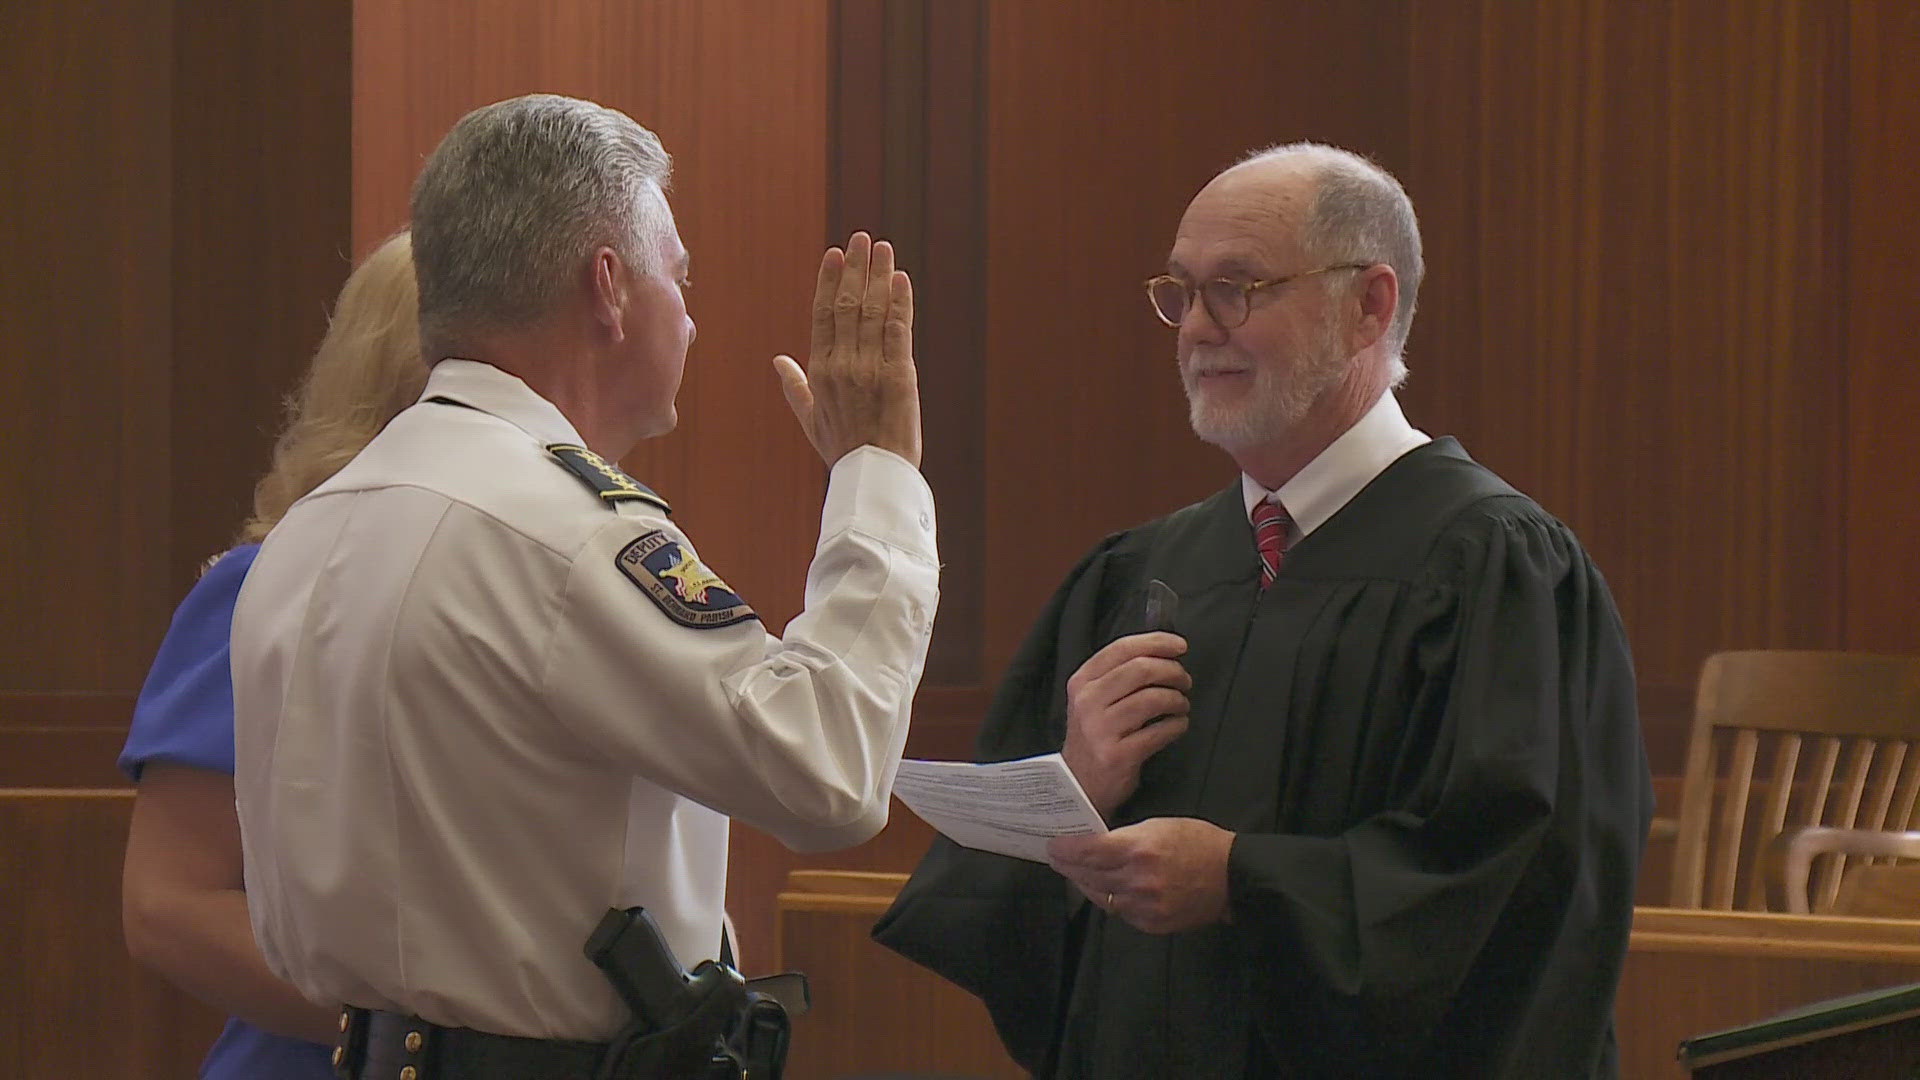 Friday morning in St. Bernard Parish Sheriff Jimmy Pohlmann was sworn in for a fourth term as sheriff.